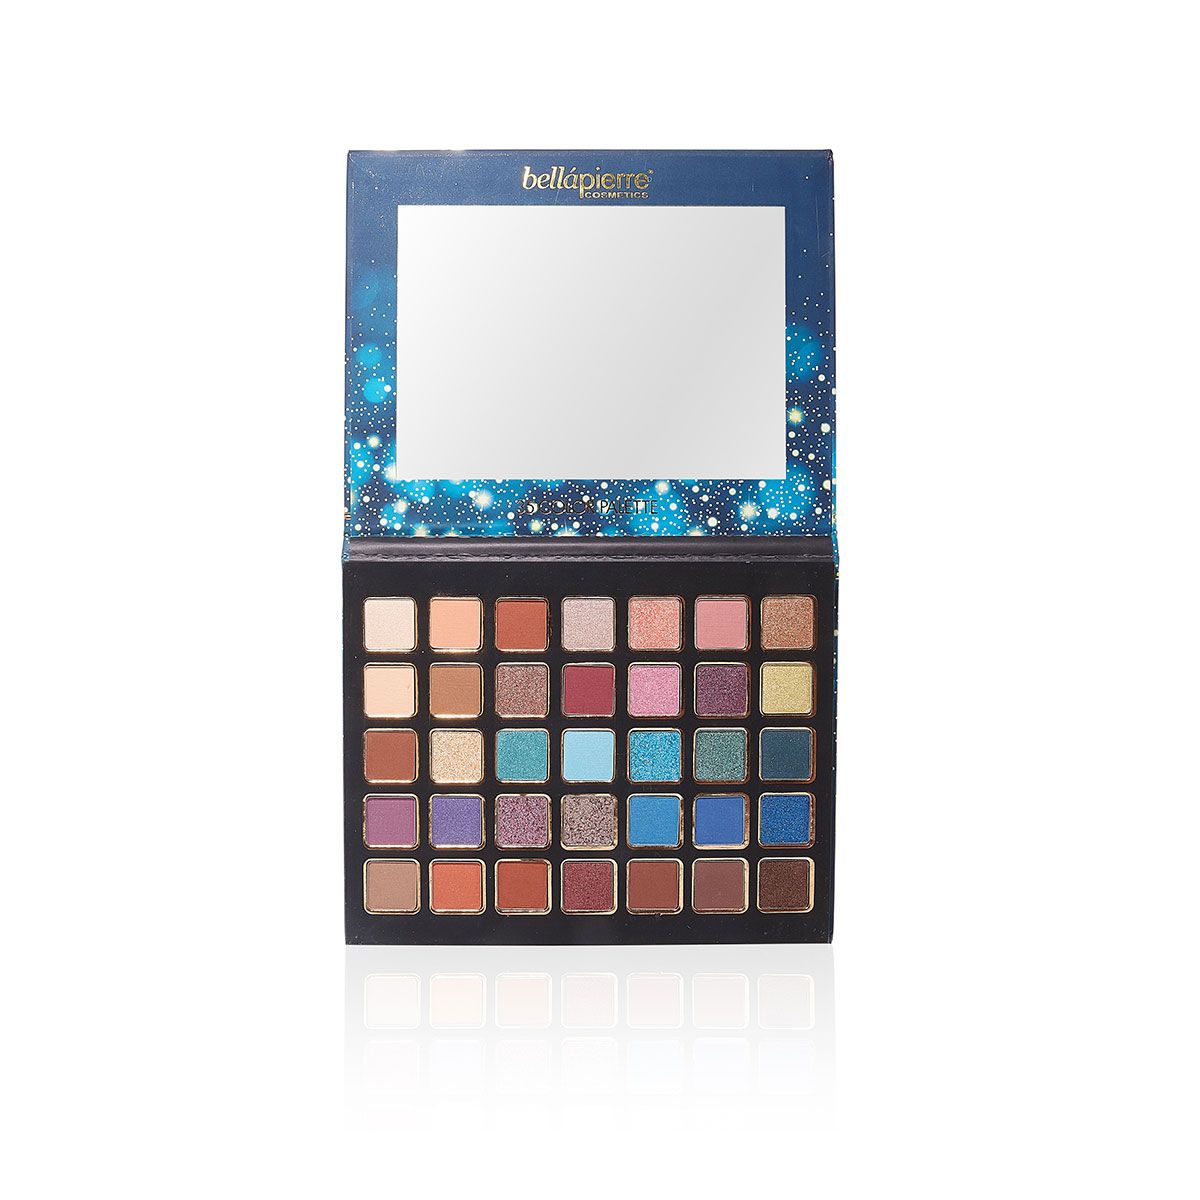 All Stars 35 colors eyeshadowpallette